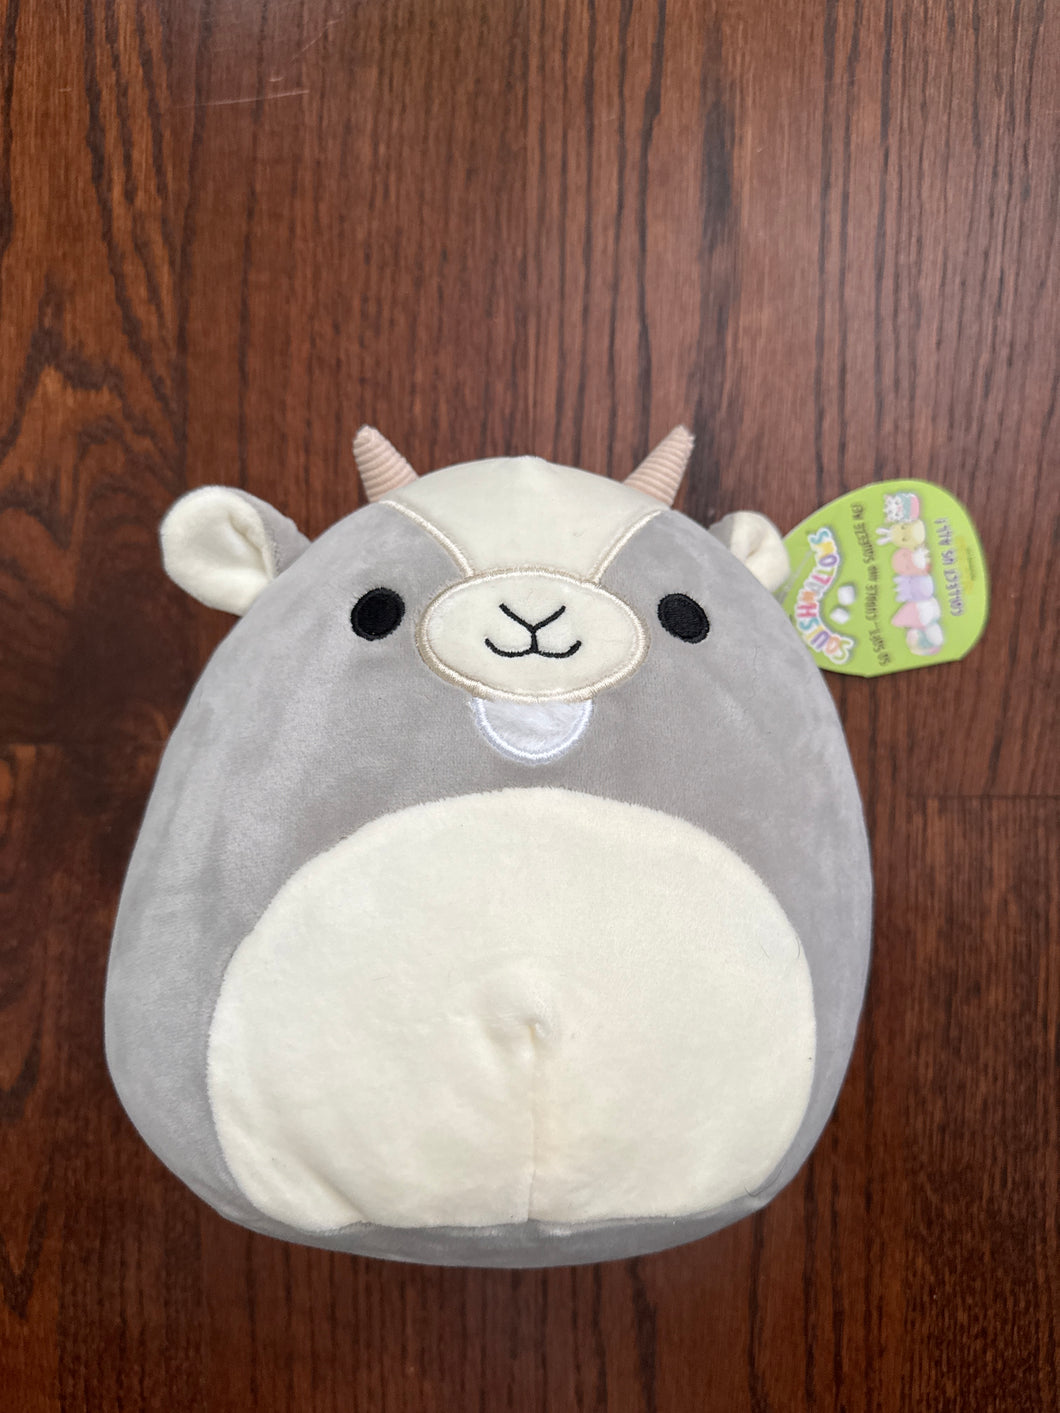 NEW Squishmallow 8 inch goat